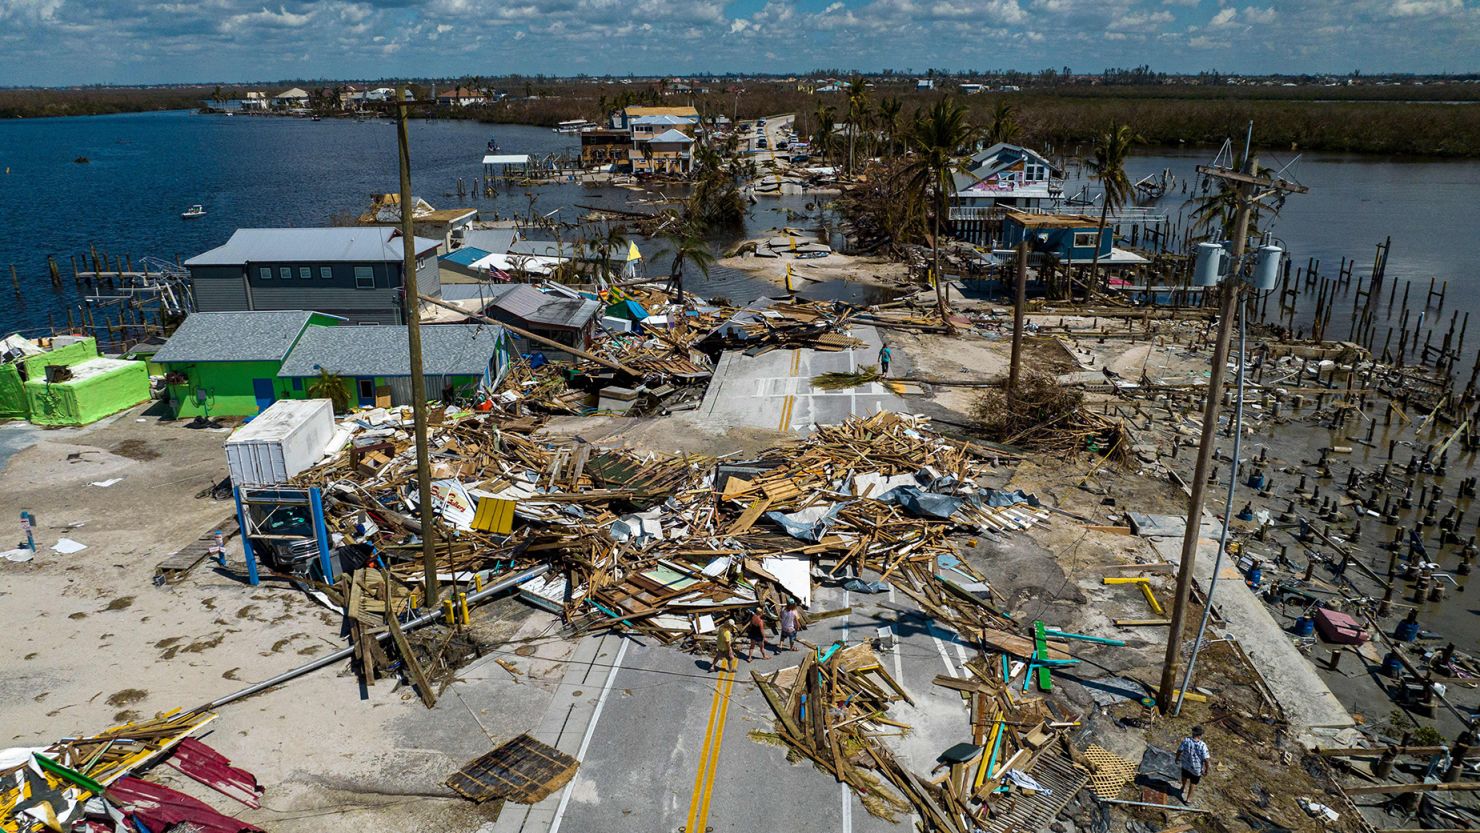 An aerial picture taken on October 1, 2022, shows a broken section of the Pine Island Road, debris and destroyed houses in the aftermath of Hurricane Ian in Matlacha, Florida.